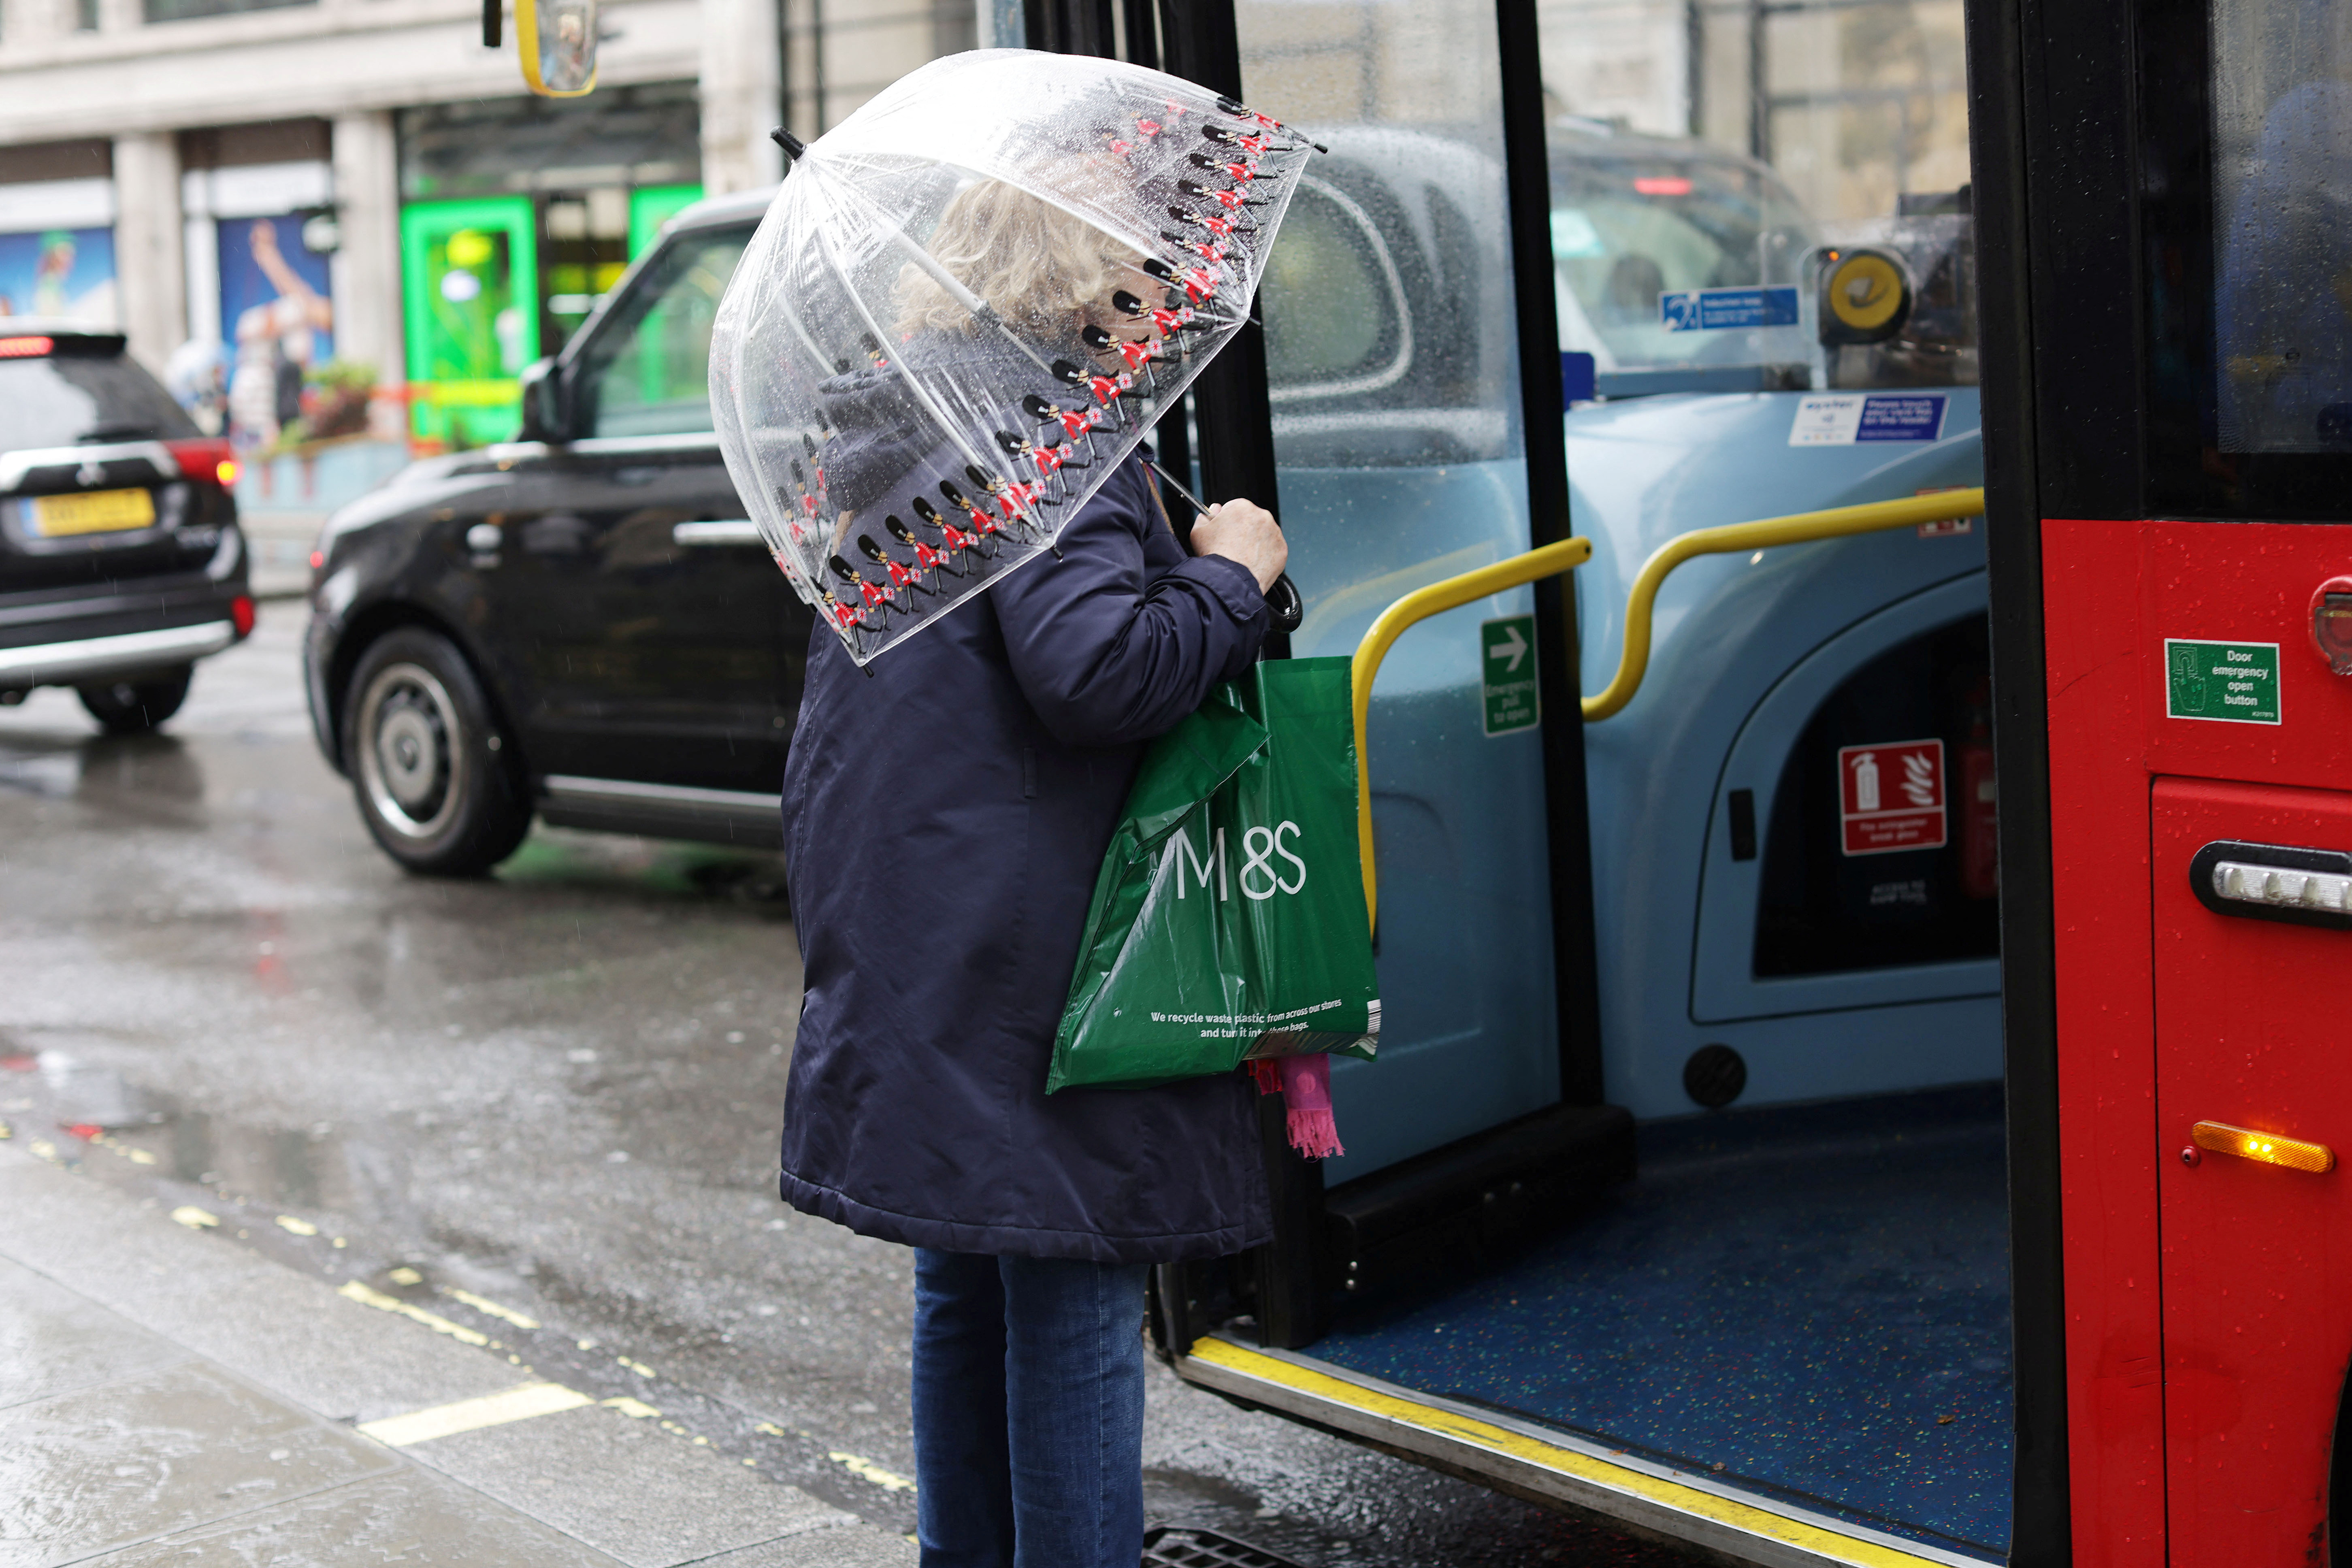 A person holds a shopping bag on Oxford Street in London